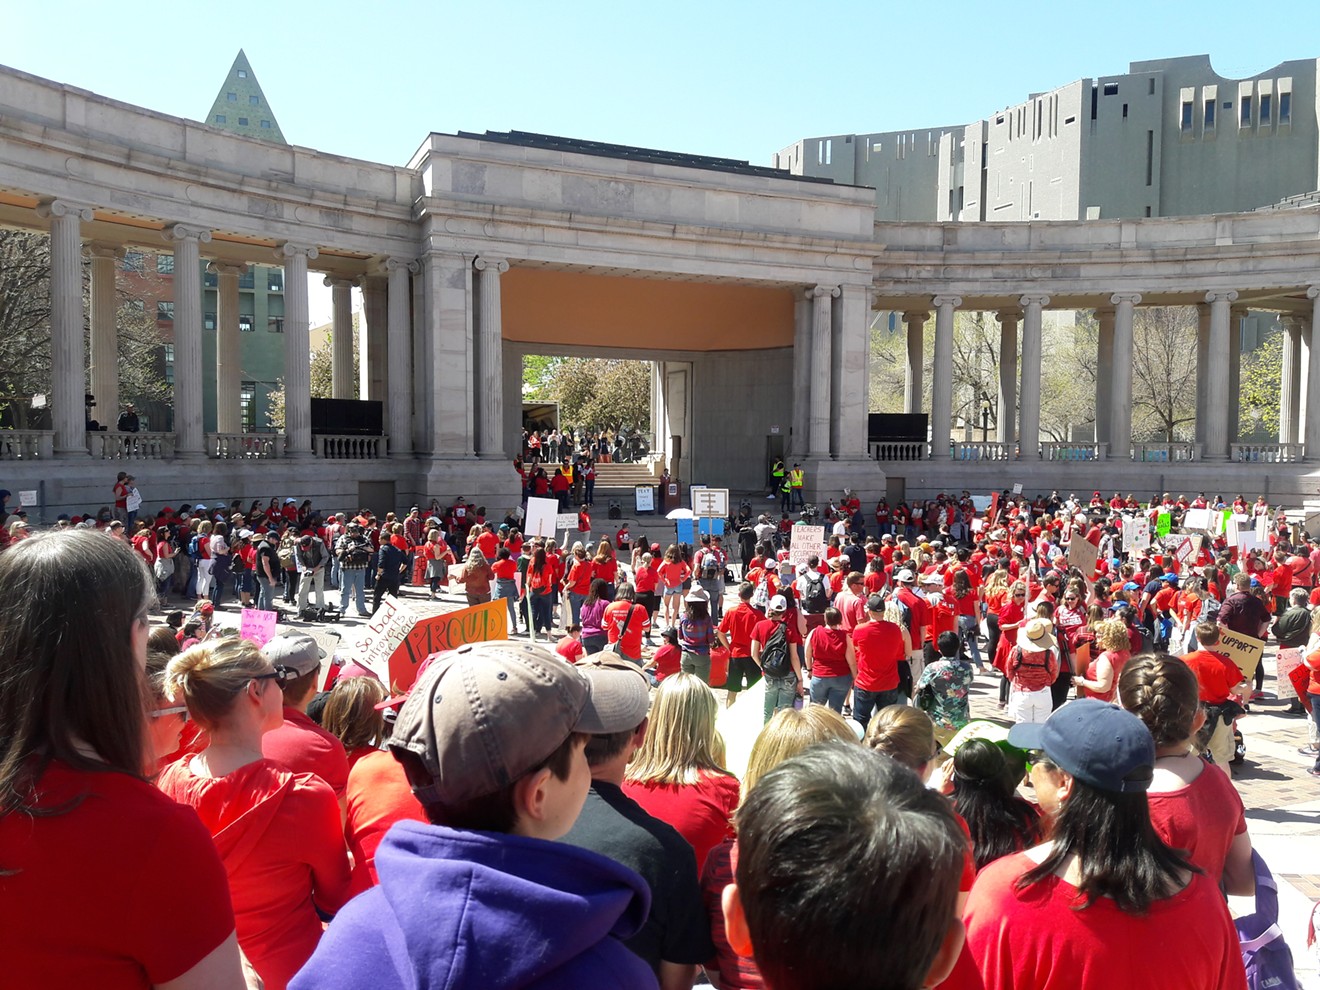 Colorado educators marched on the Capitol as part of the national #RedForEd rallies during the 2018 legislative session. Initiative 93 signature-gatherers were stationed in Civic Center Park during the rally.